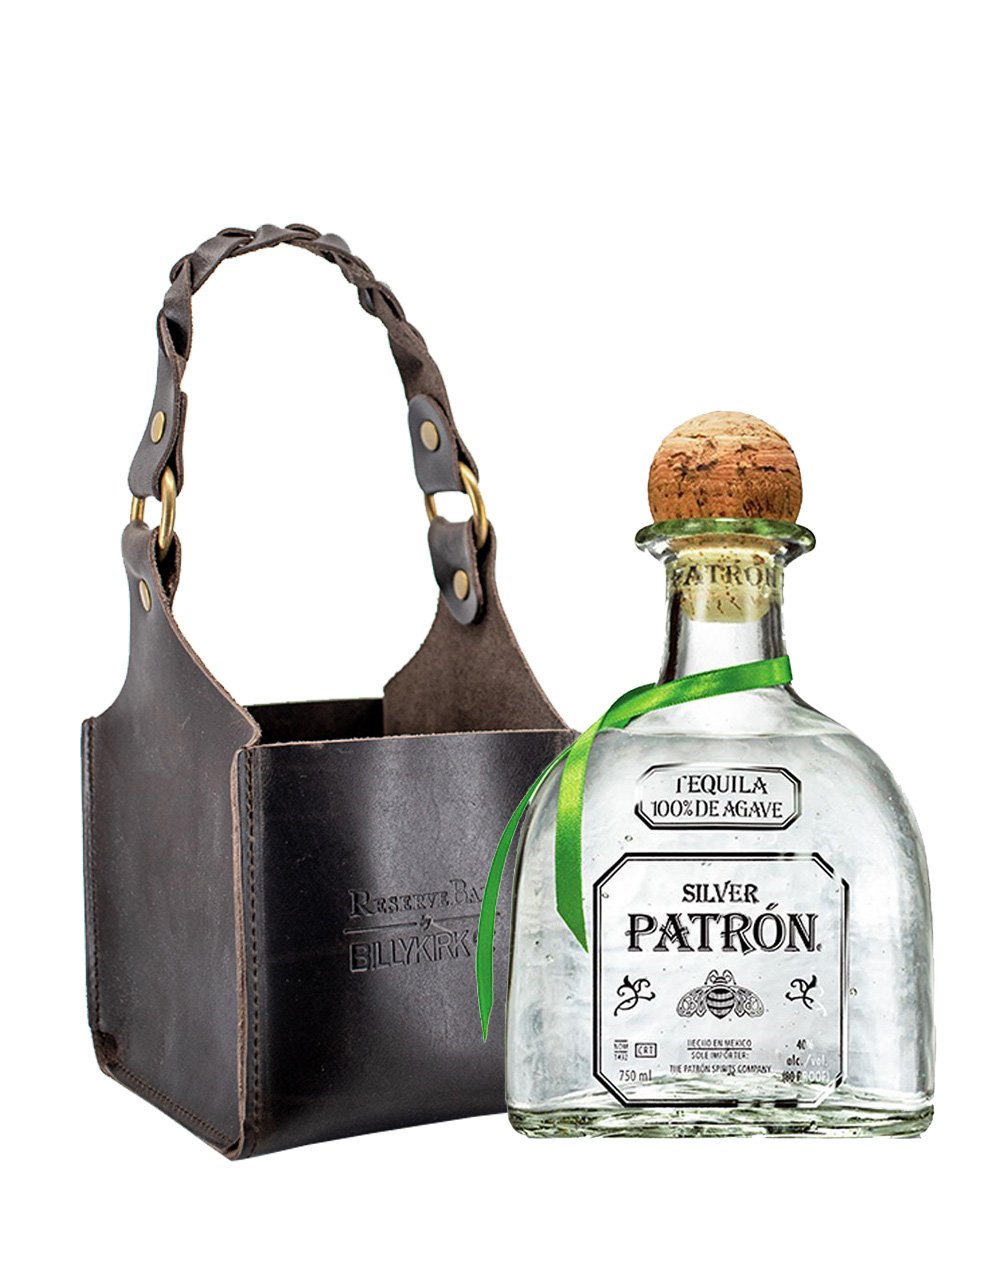 Additional Bottle Holder Inside Your Purse - Add to Your Order